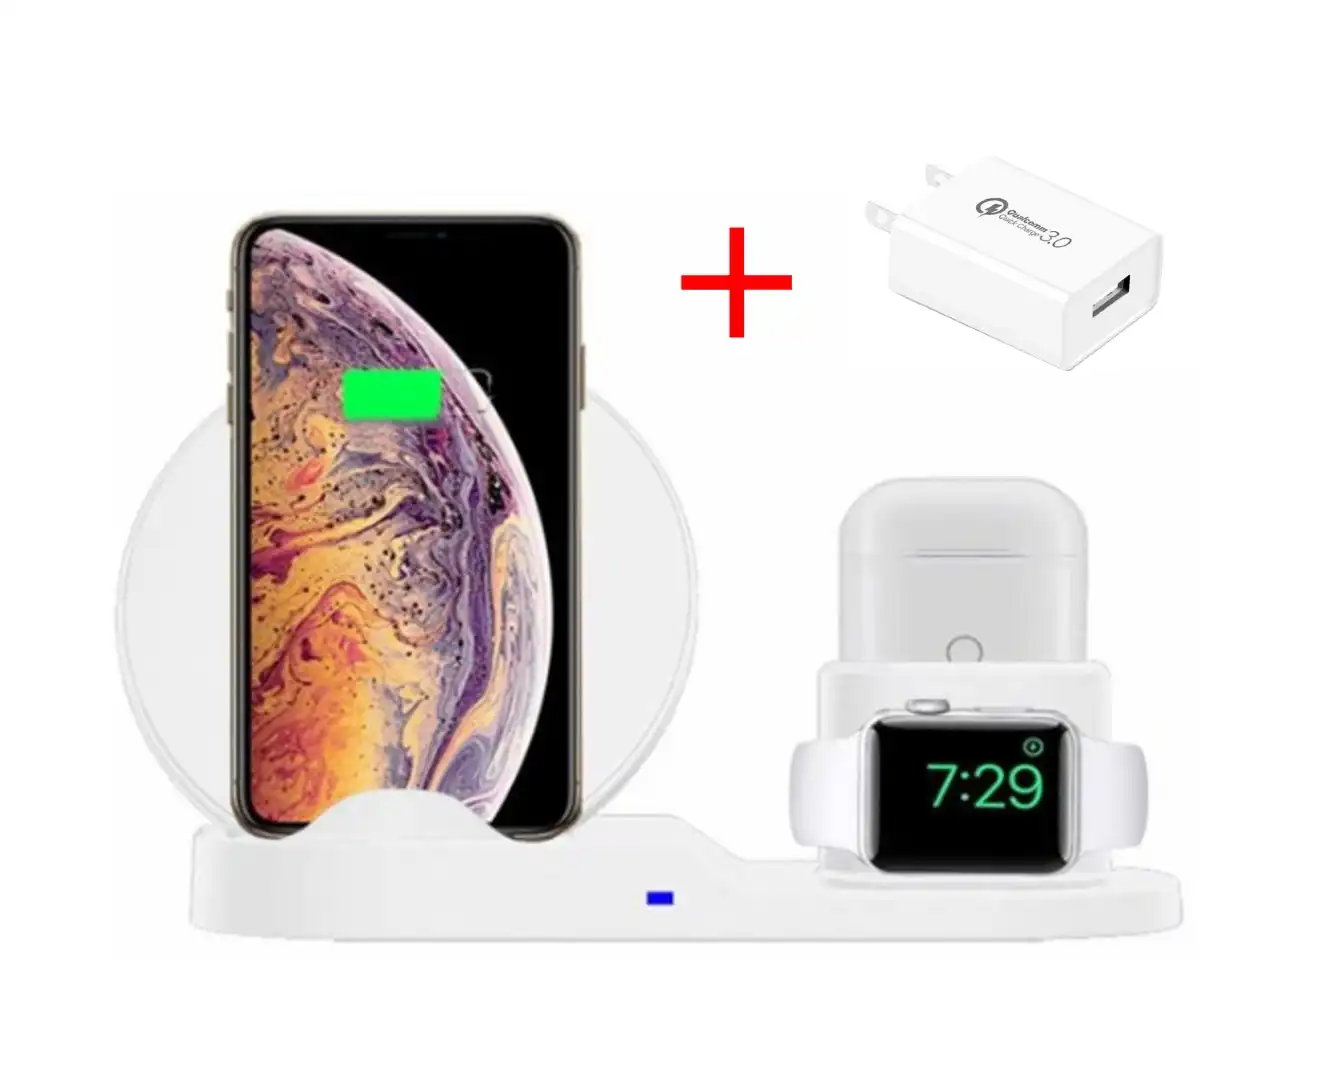 10W 3-in-1 Fast Charge Triple Wireless Charger for Apple (White) including 18W Qualcomm Adapter